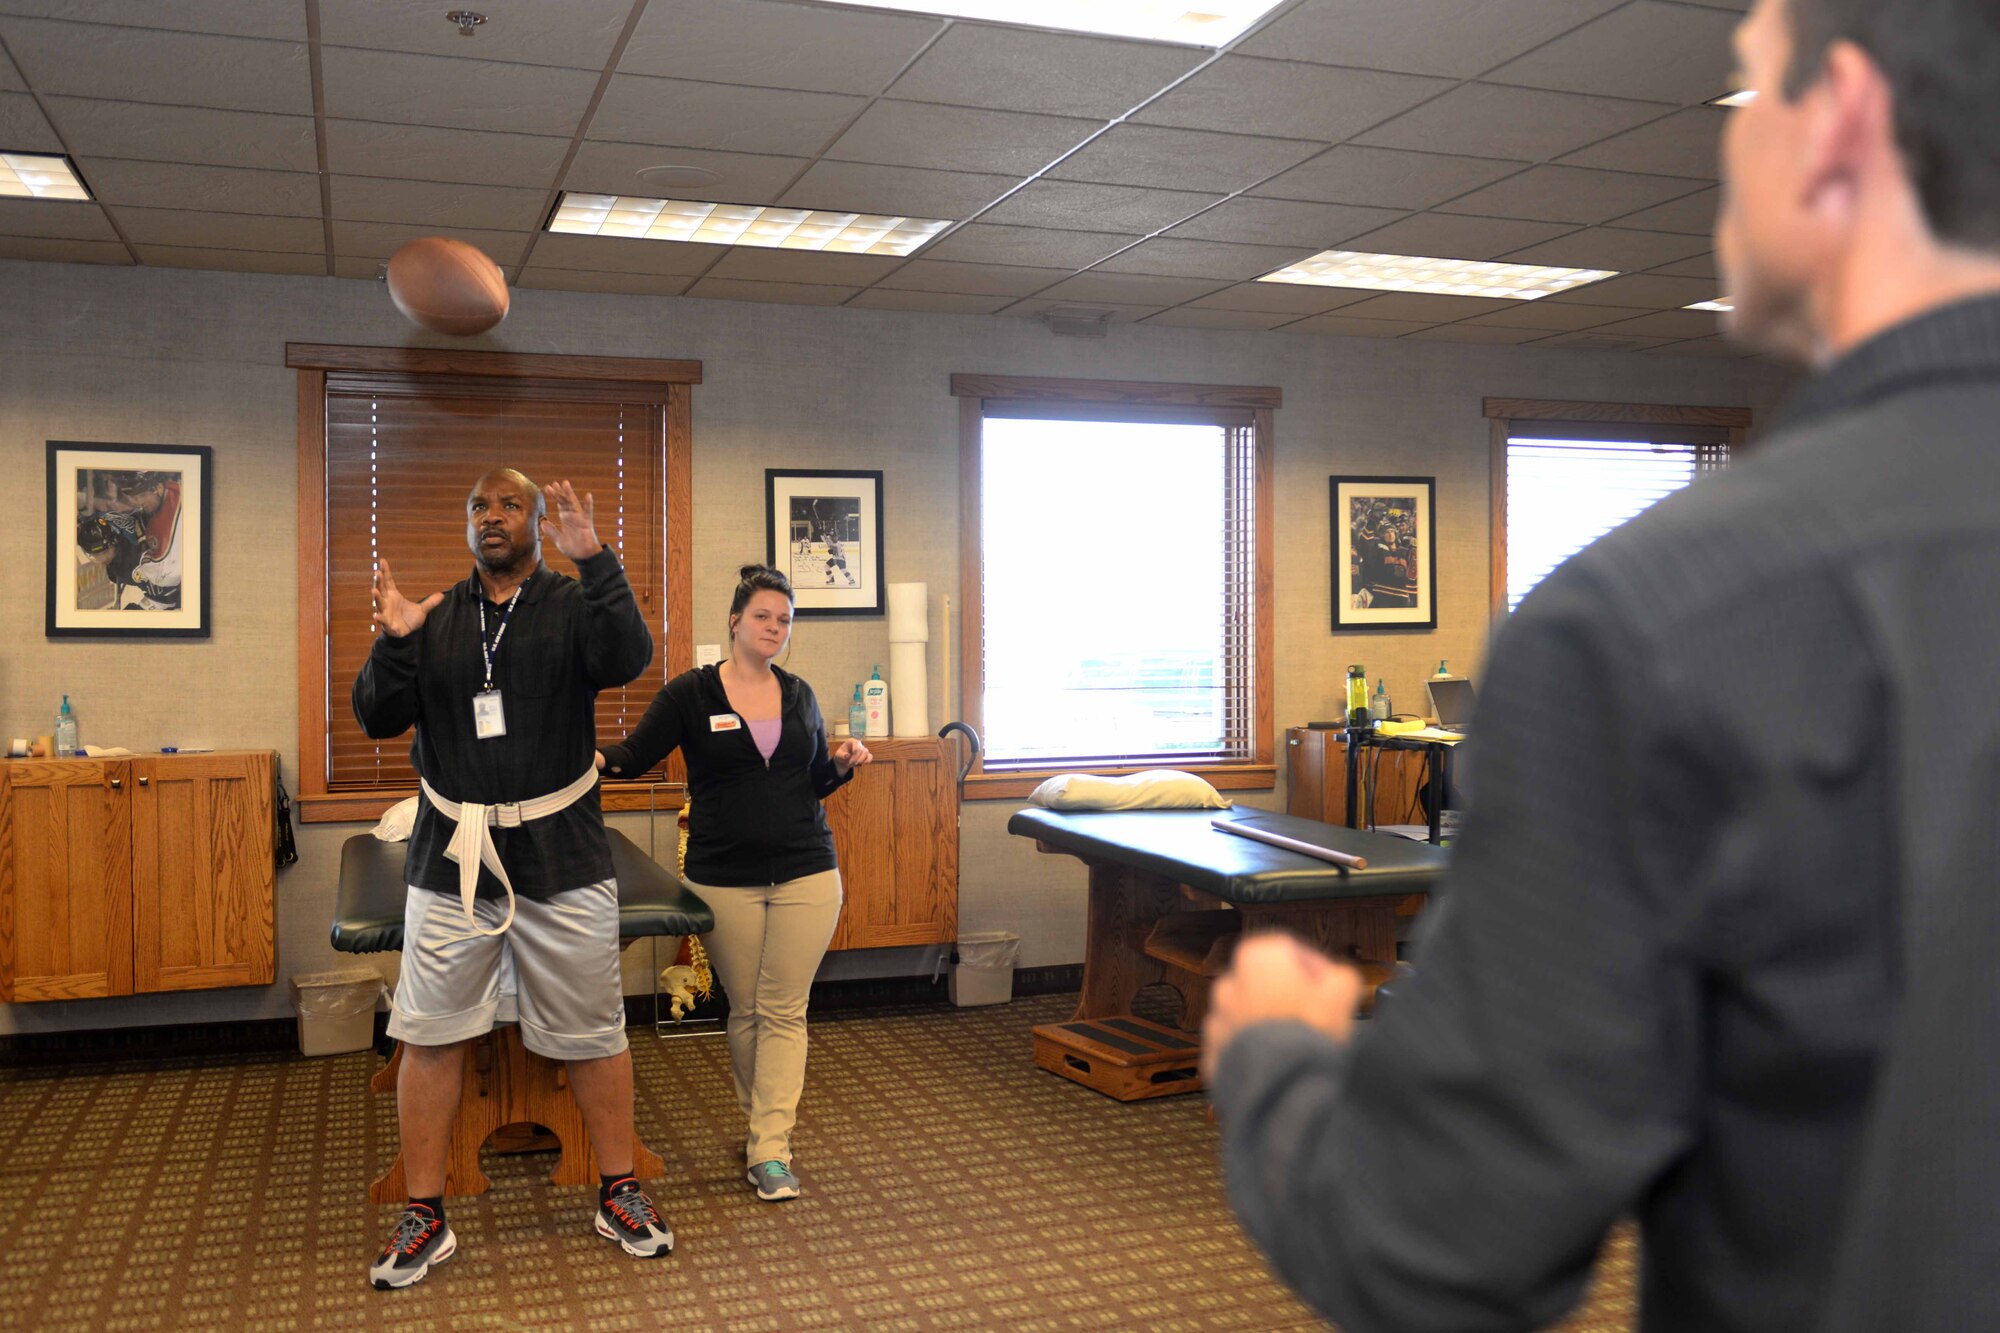 Donald Bell, 28th Bomb Wing equal opportunity director, catches a football during a physical therapy session in Rapid City, S.D., Oct. 8, 2014. During Physical therapy, Bell goes through exercises which force him to use both hands and legs, in an effort to recover the movement on his left side. (U.S. Air Force photo by Airman 1st Class Rebecca Imwalle/Released)